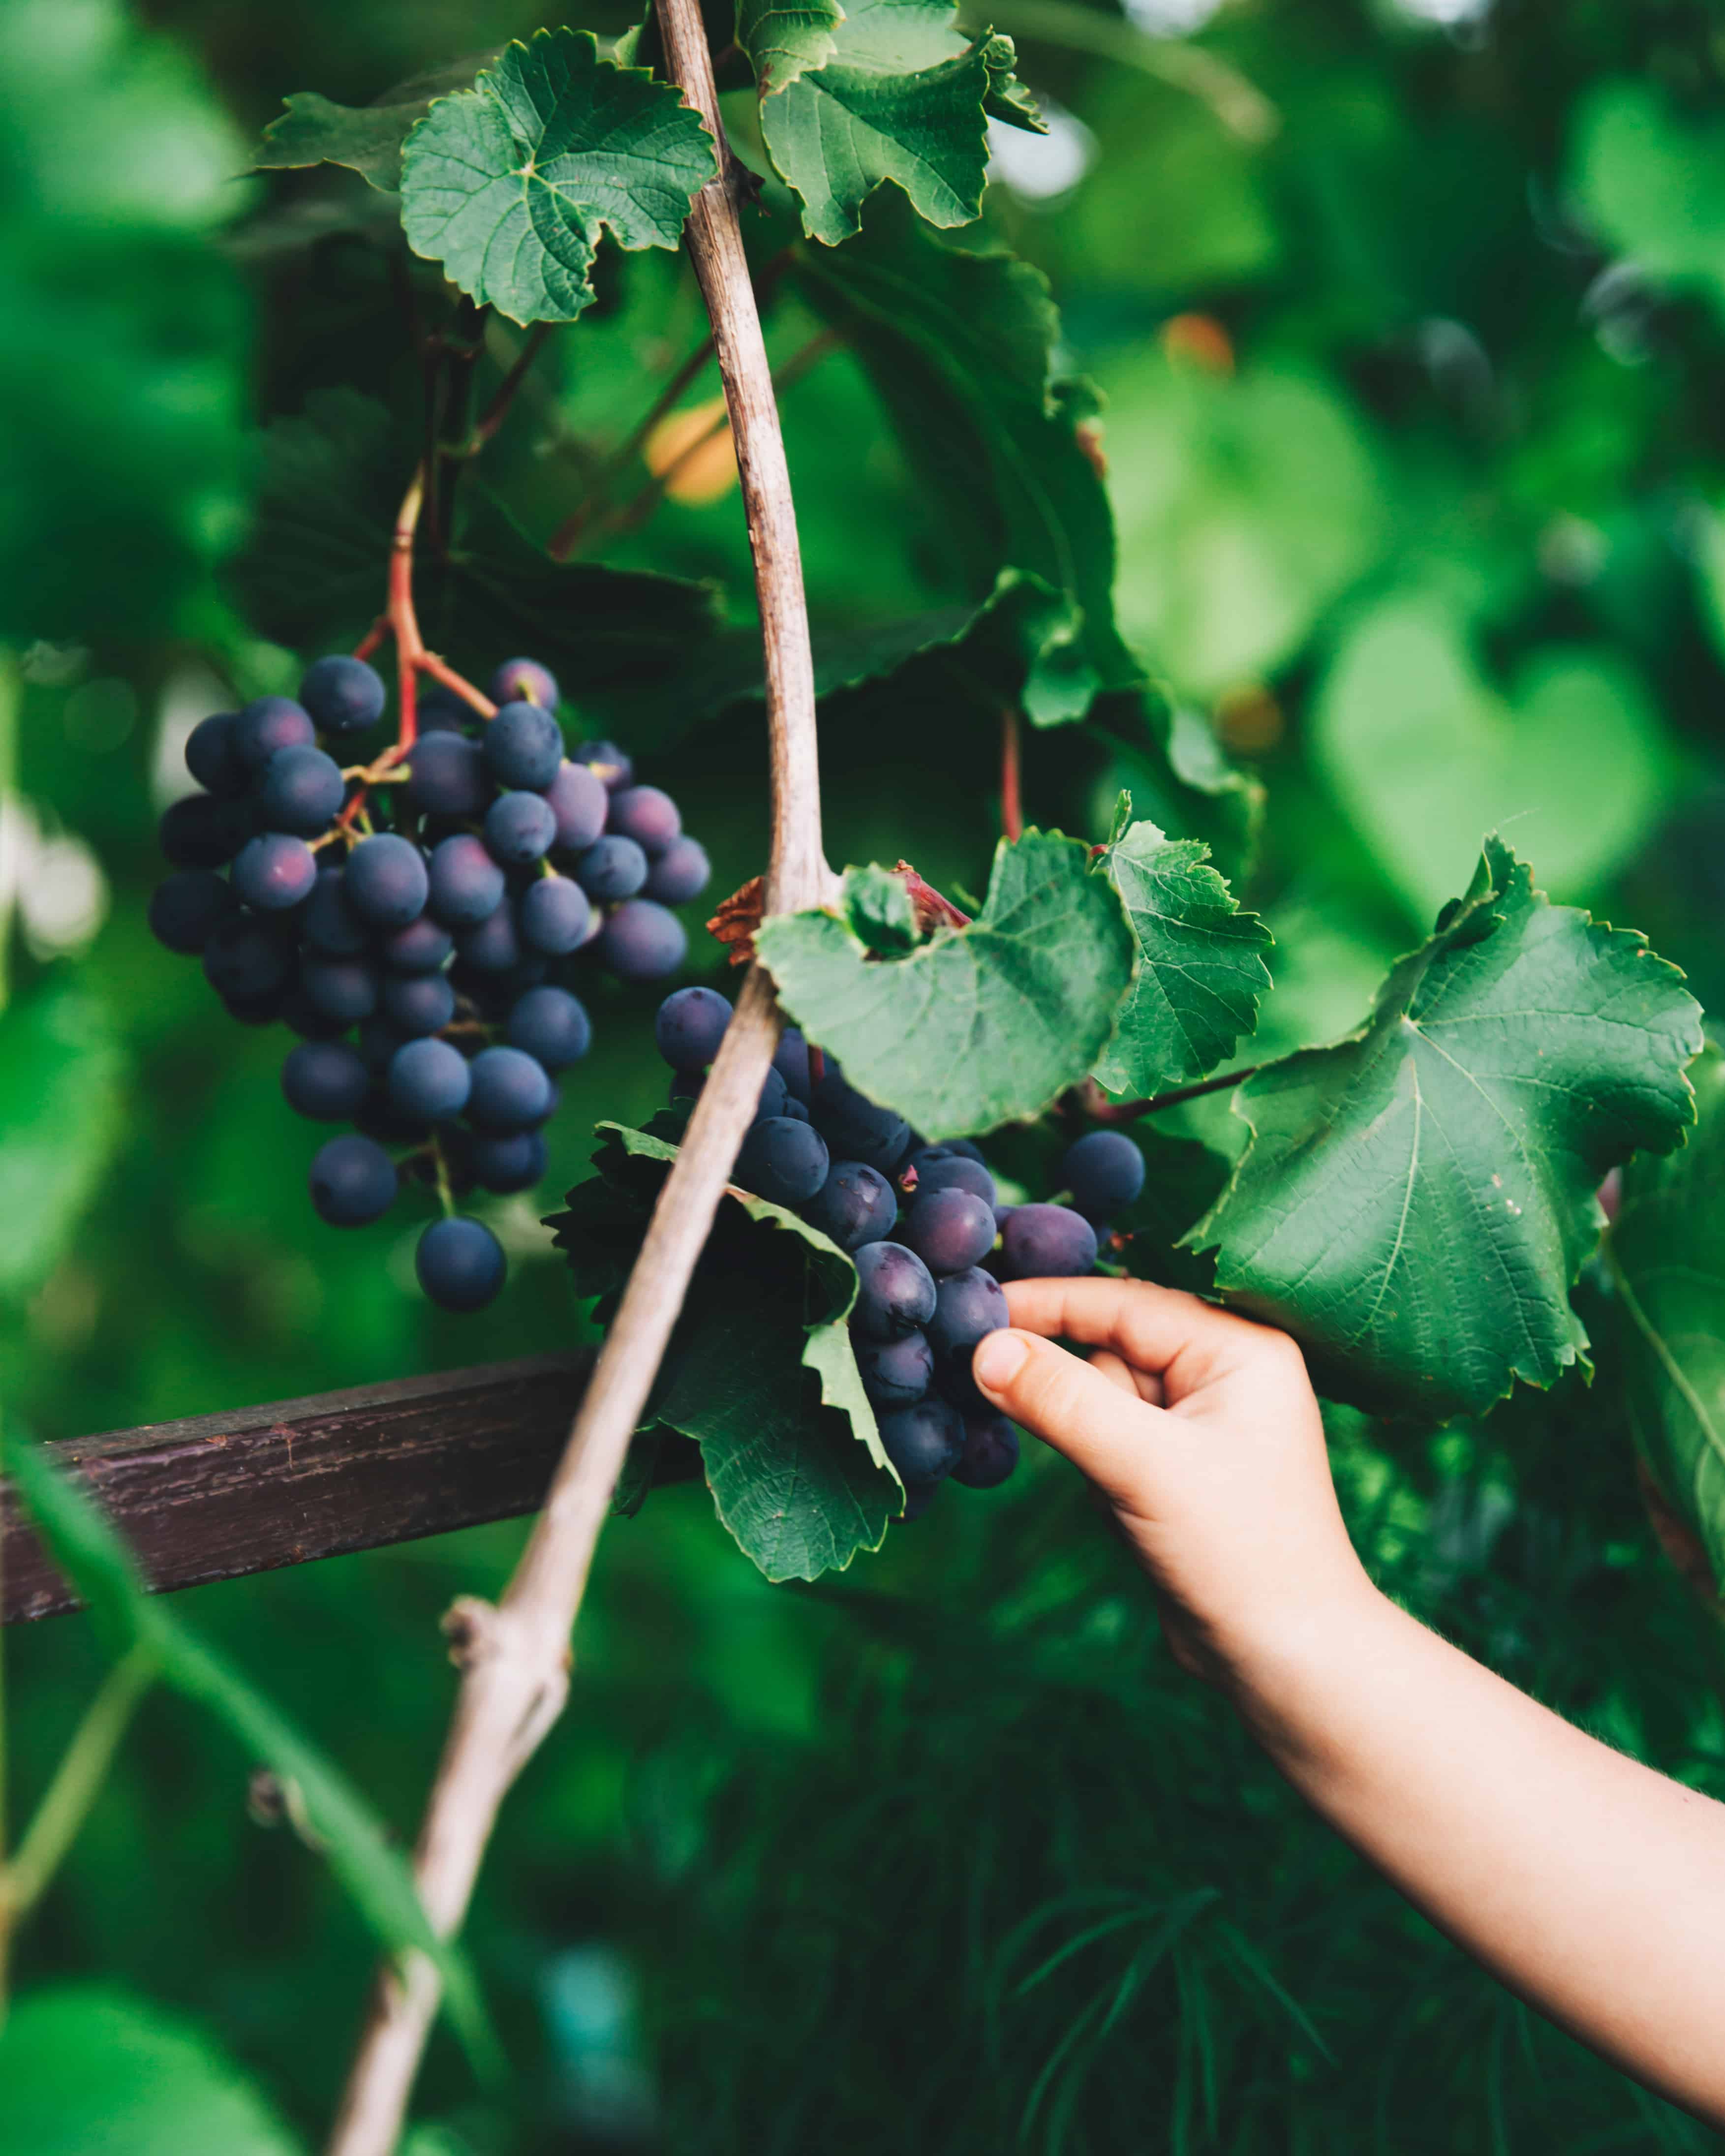 Ripe purple grapes hang on the branches. A child's hand reaches out to pick a bunch and berries